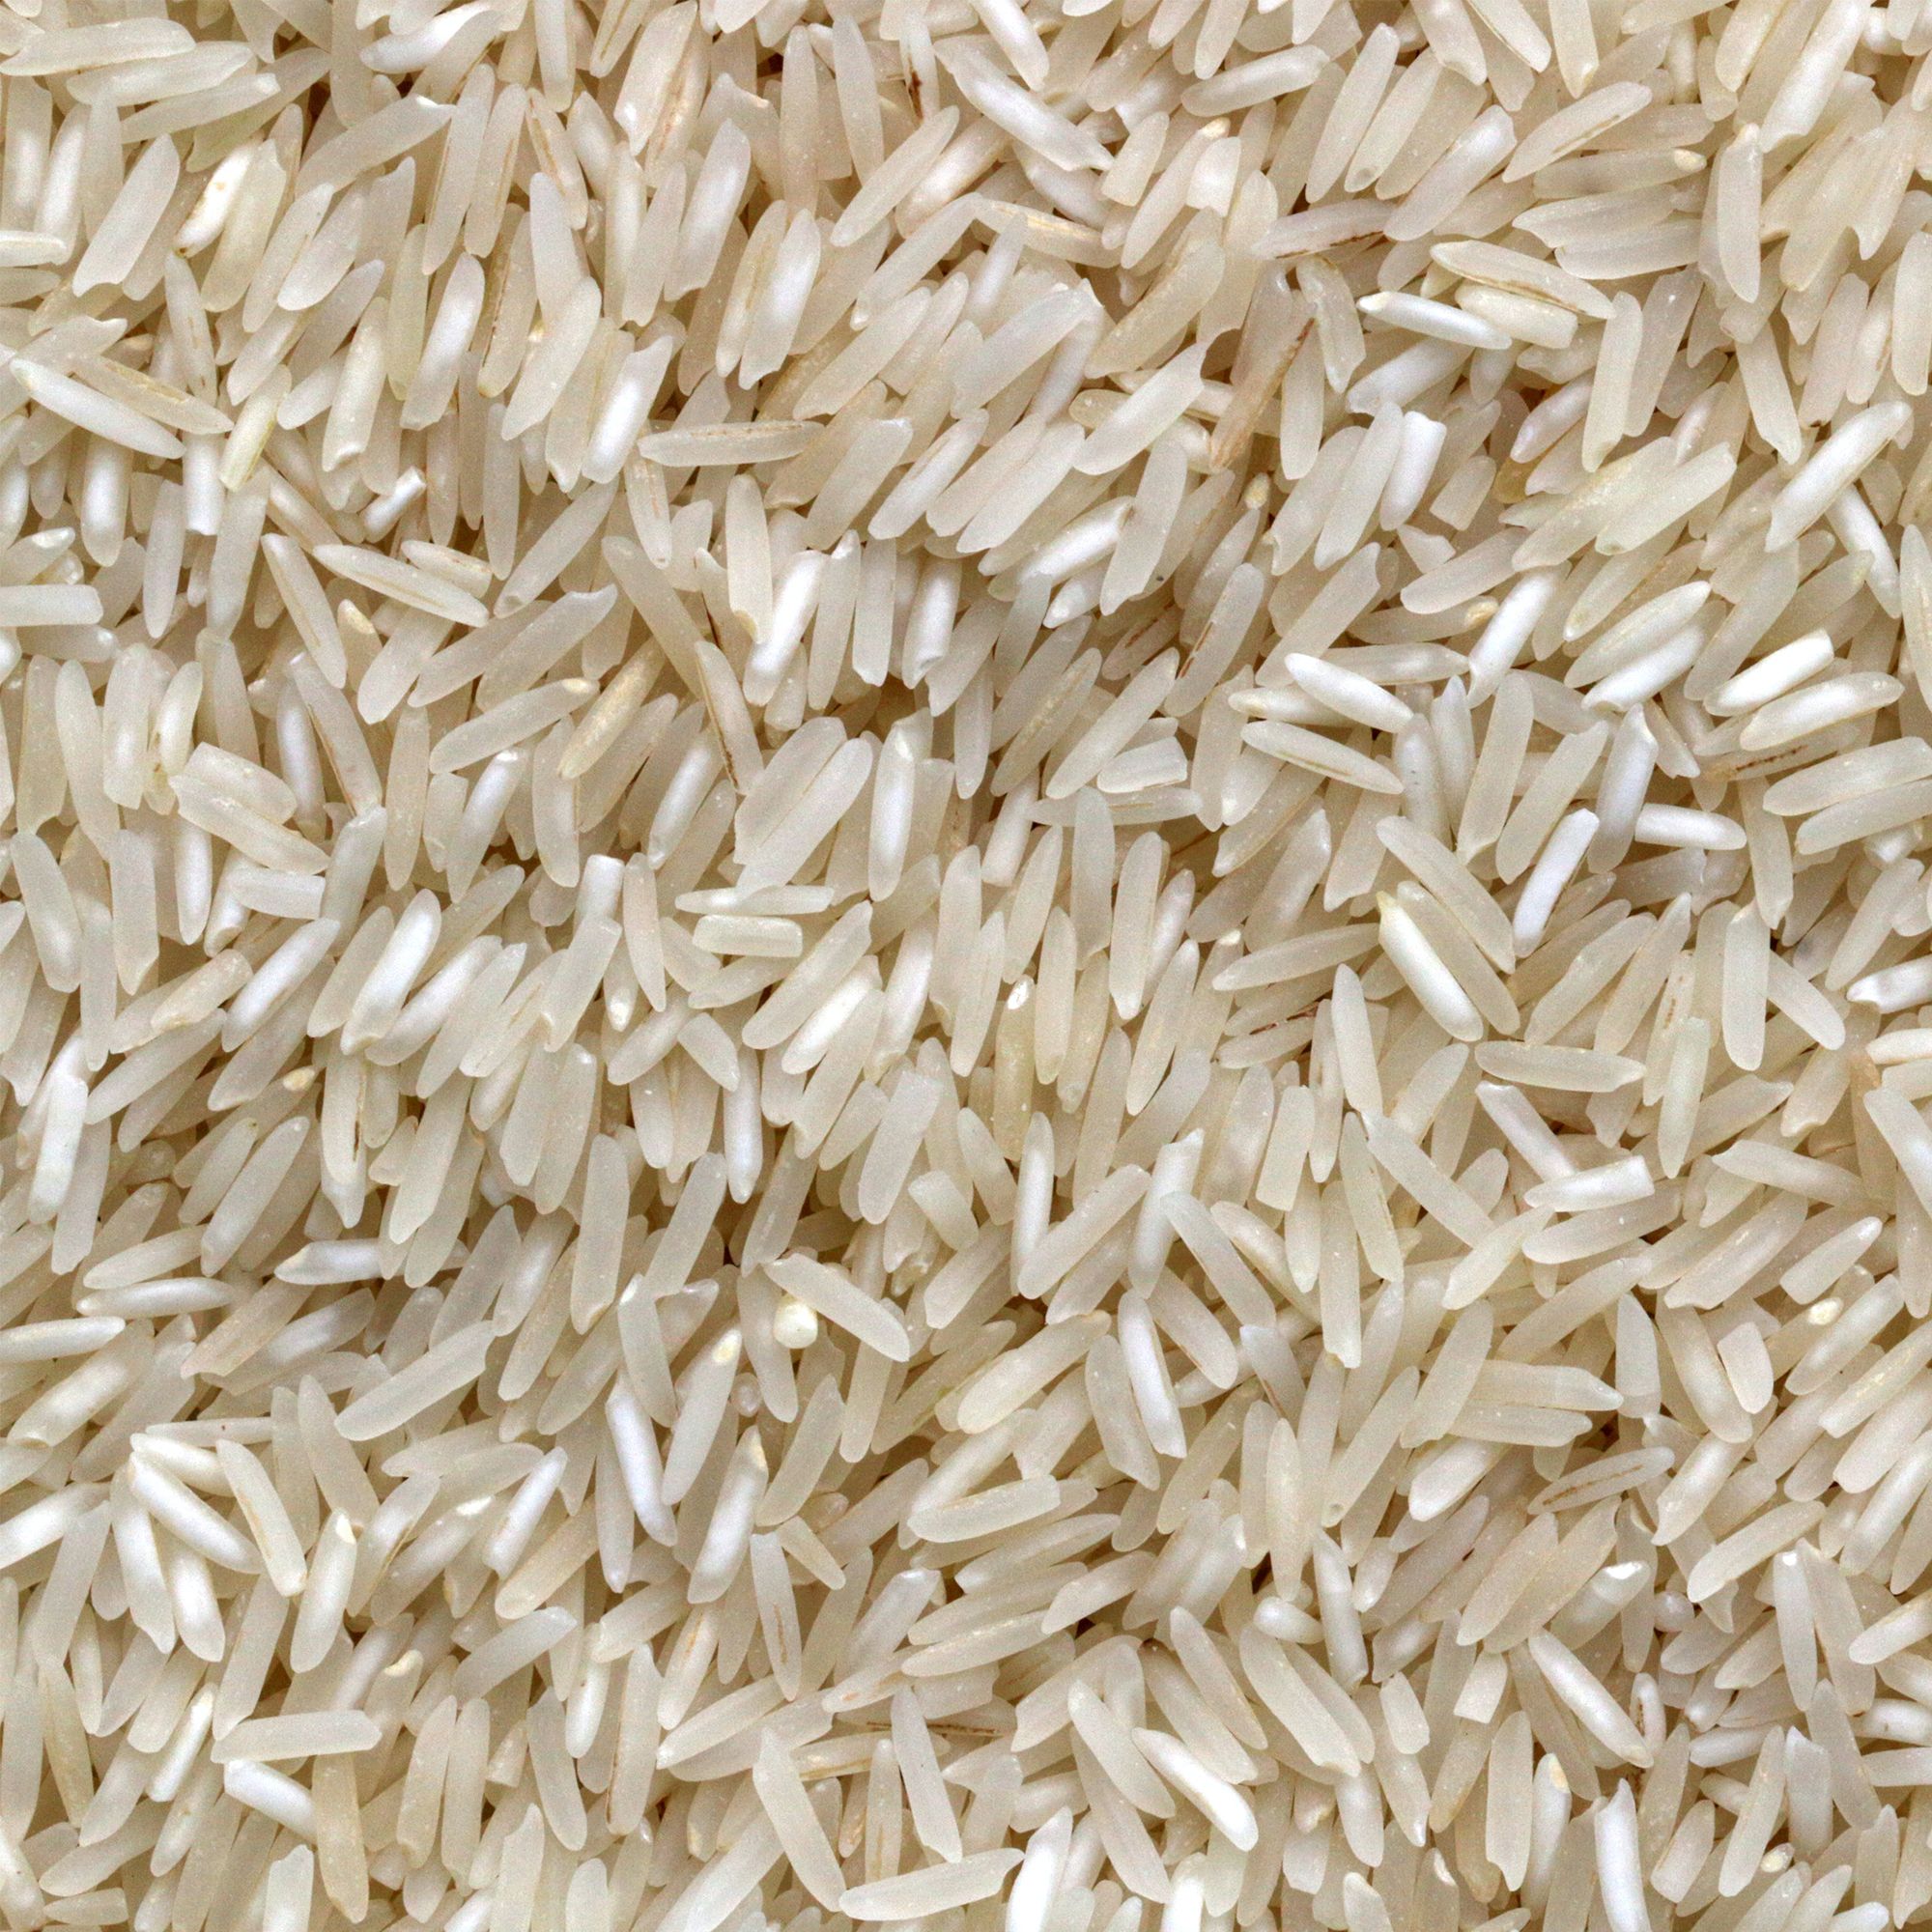 How To Cook Rice